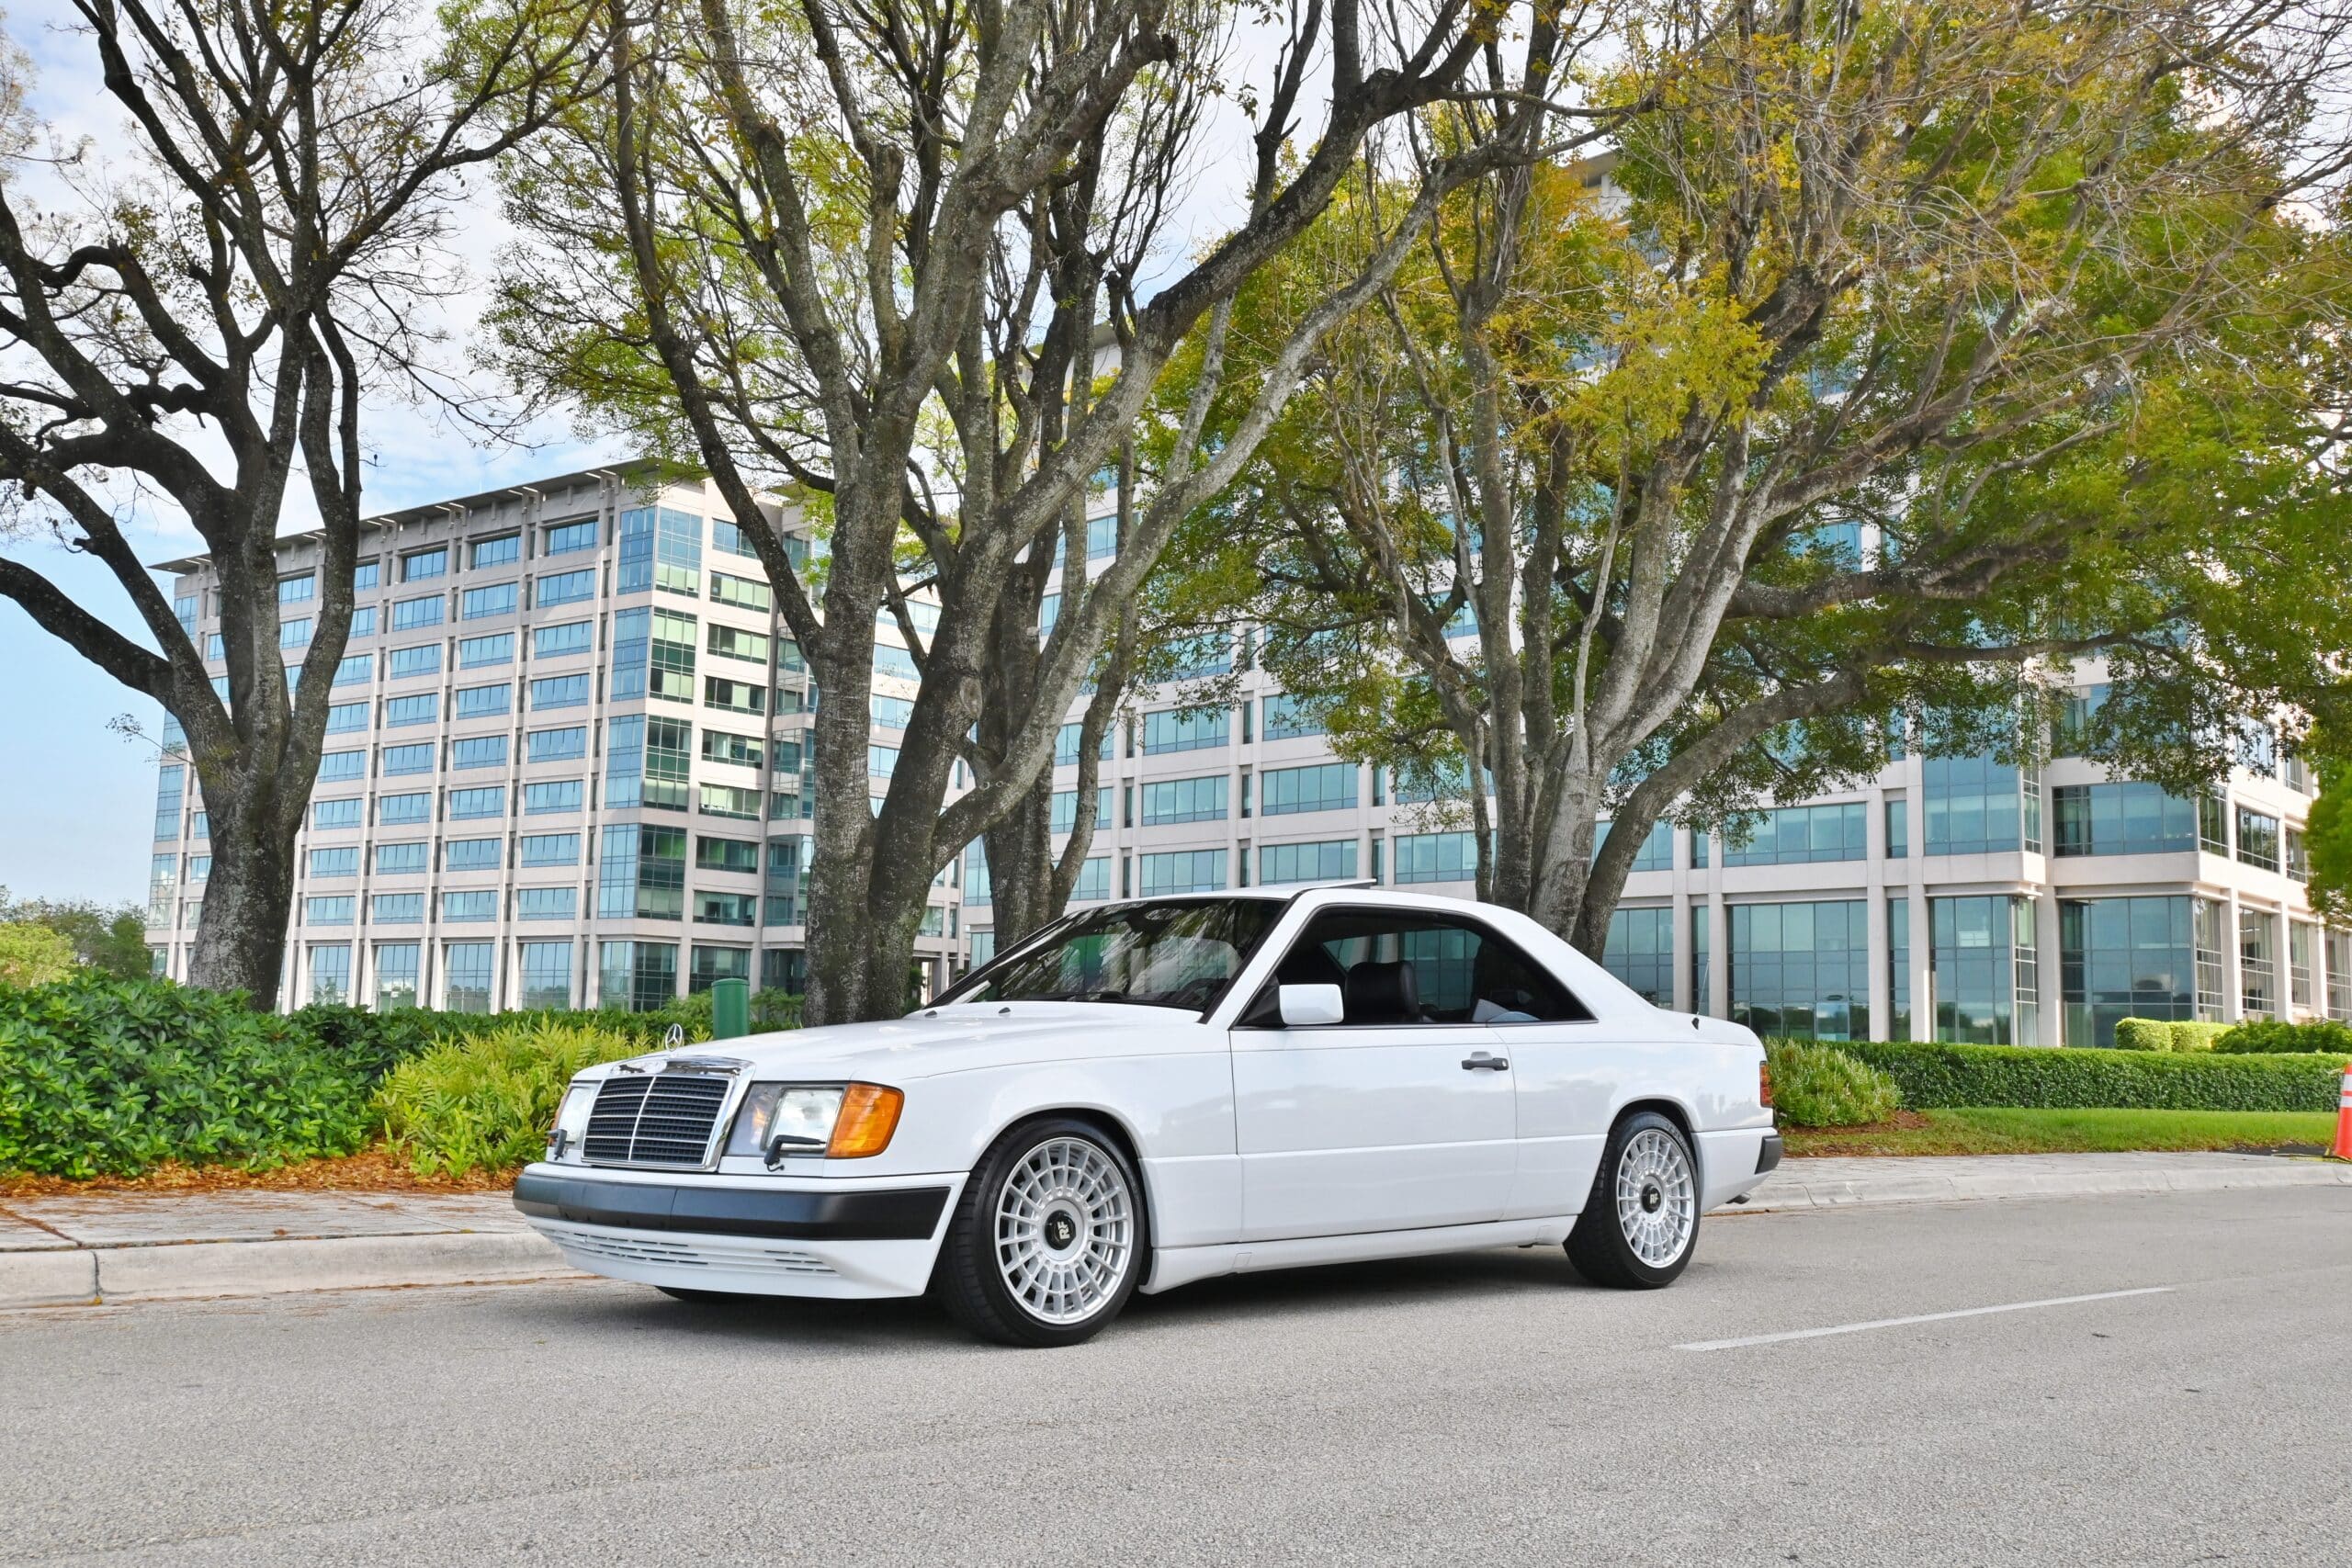 1989 Mercedes-Benz W124 300CE Cleanest 300CE in existence! $40,000 Restoration With Reciepts – Only 63k Miles